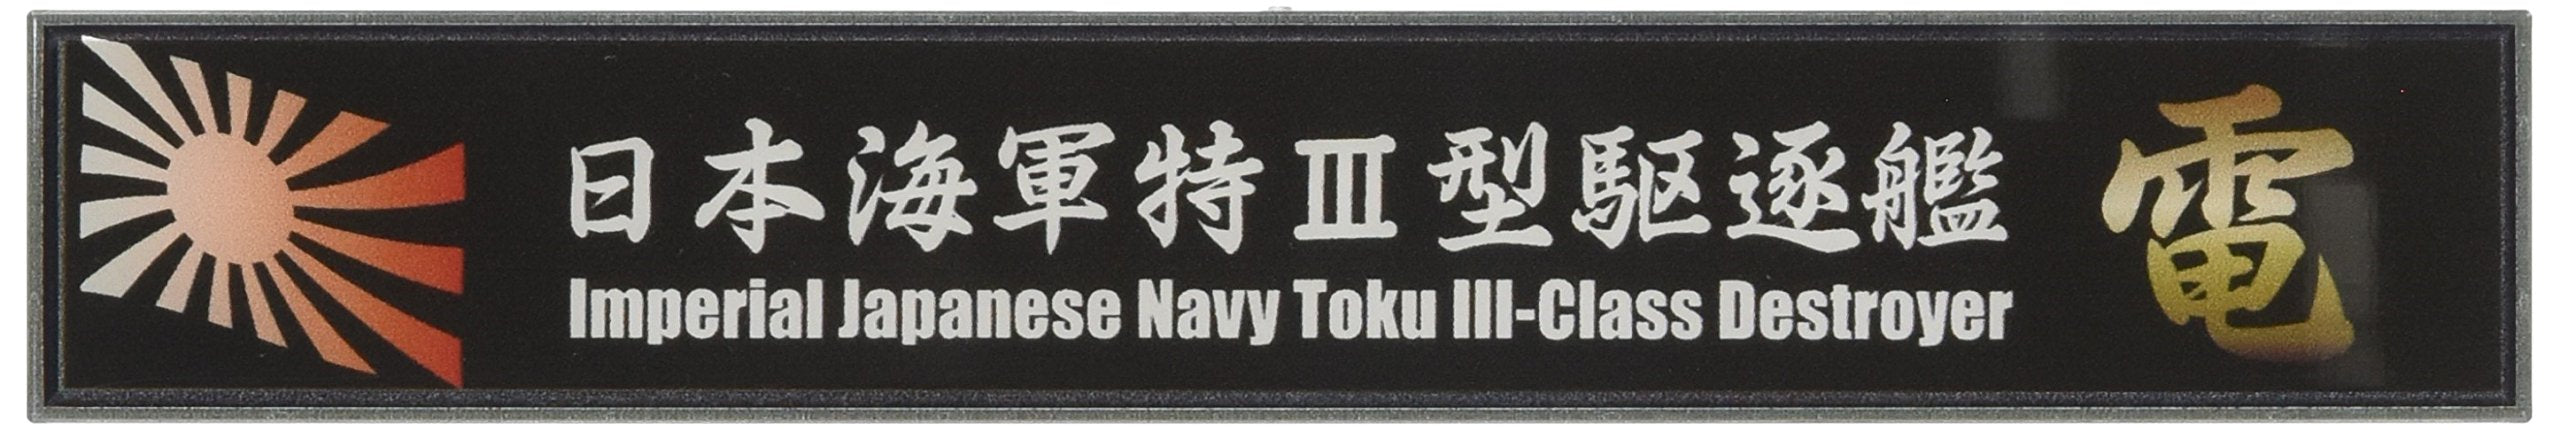 Fujimi Model Ship Name Plate Series No.104 Japanese Navy Special Type Iii Destroyer Den Plastic Model Parts